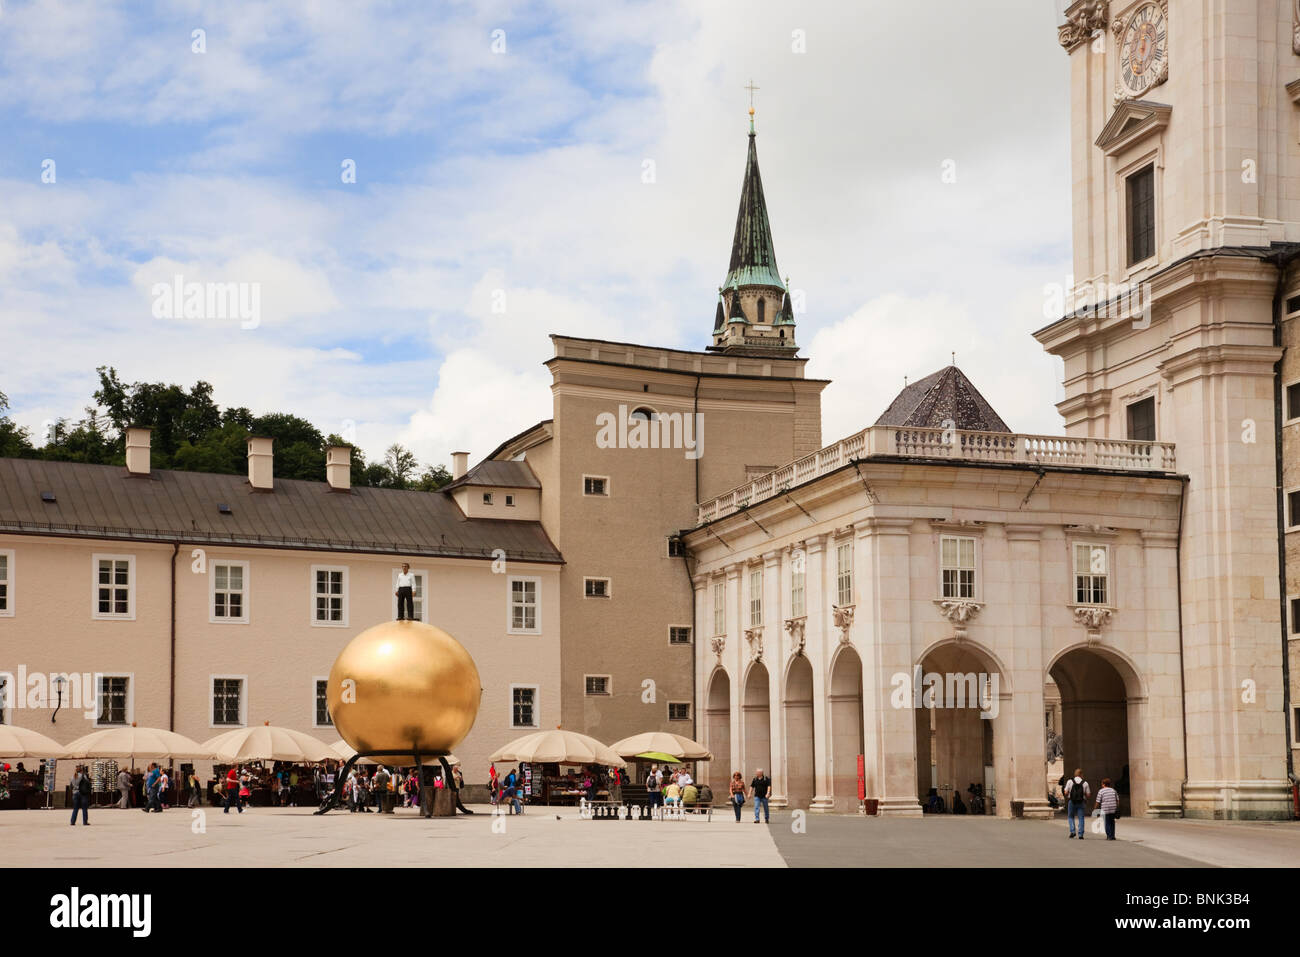 Kapitelplatz, Salzburg, Austria. St Peter's Abbey and 'Sphaera' sculpture in the historic city square by Dom Cathedral Stock Photo